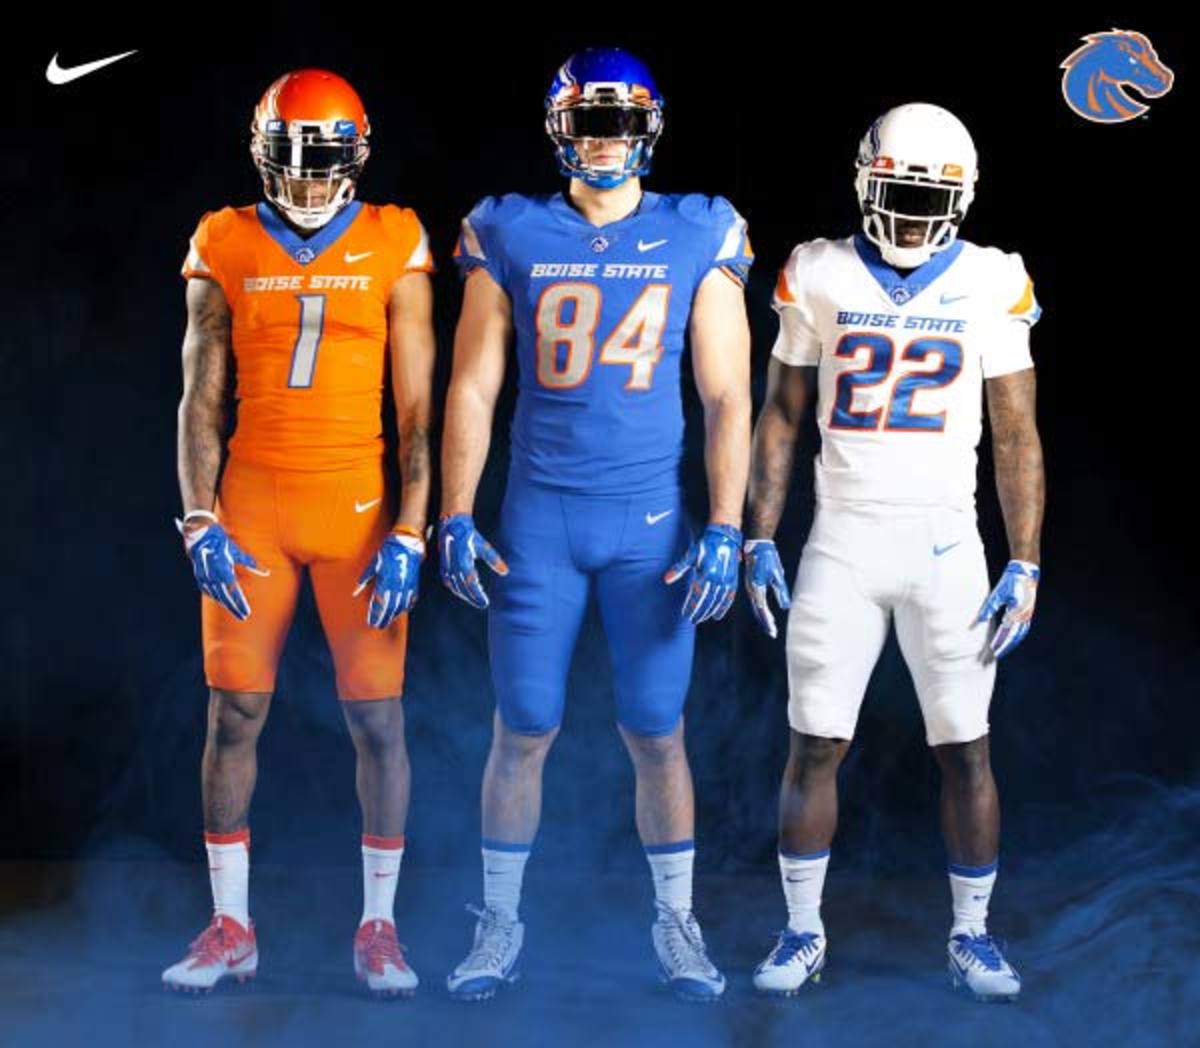 College Football Uniforms: Boise State